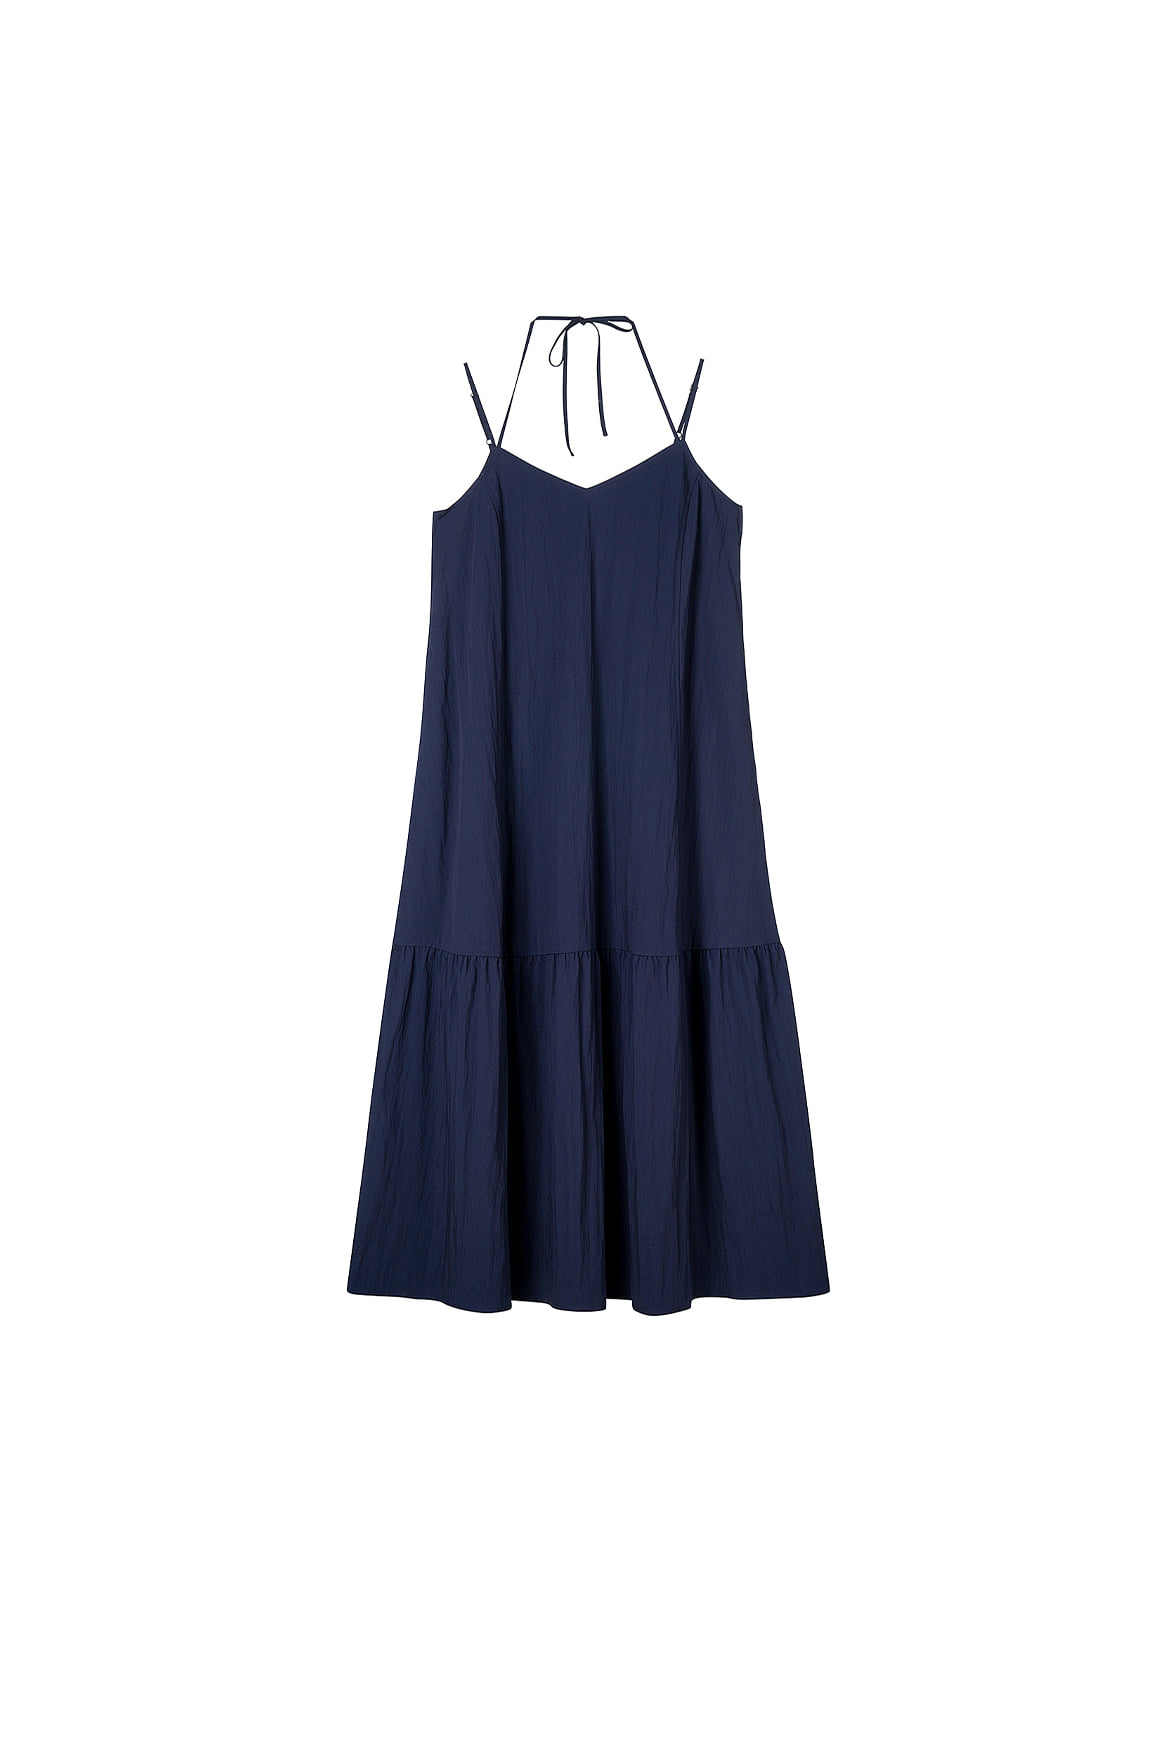 Double String Summer Dress_Navy